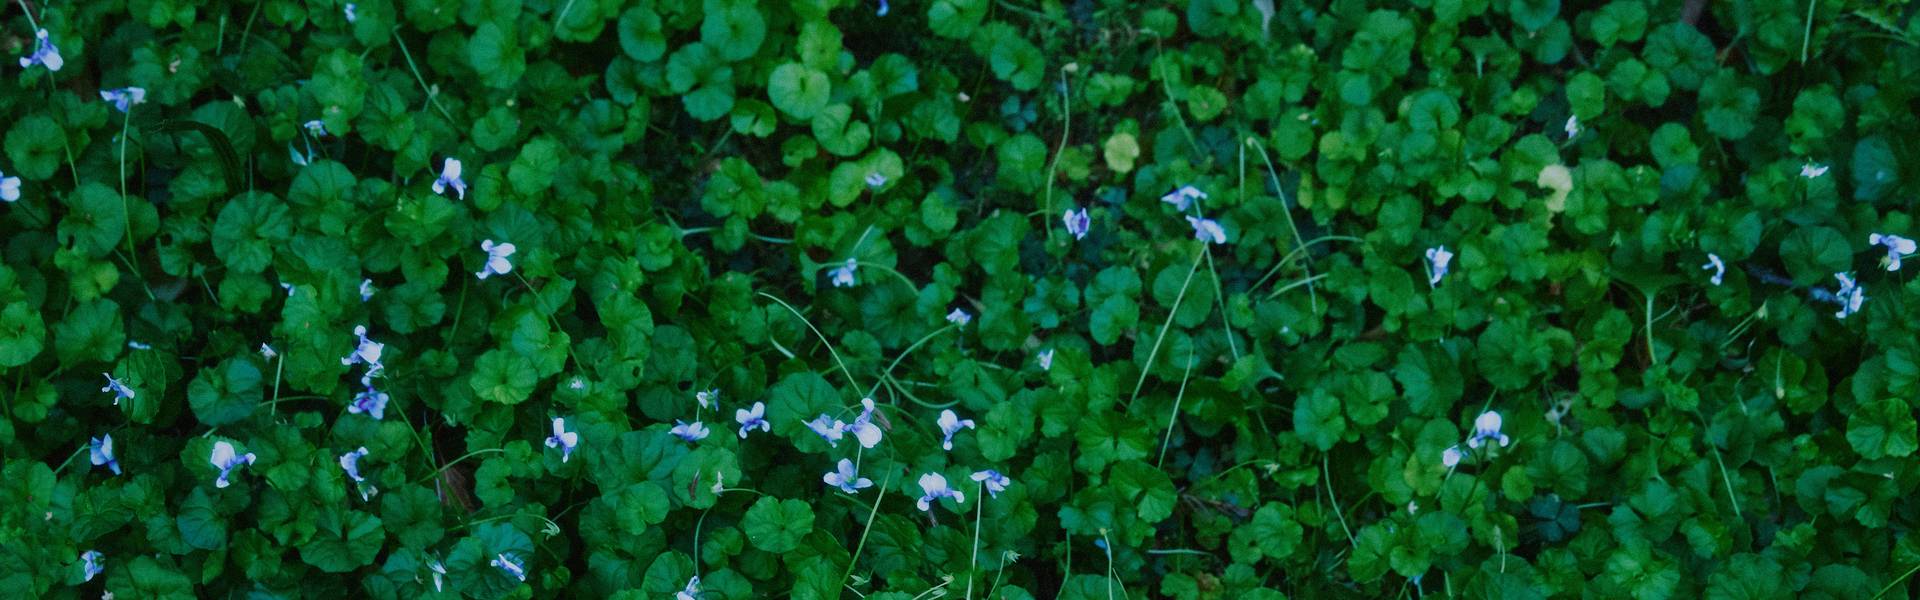 Field of small green leaves and blue flowers